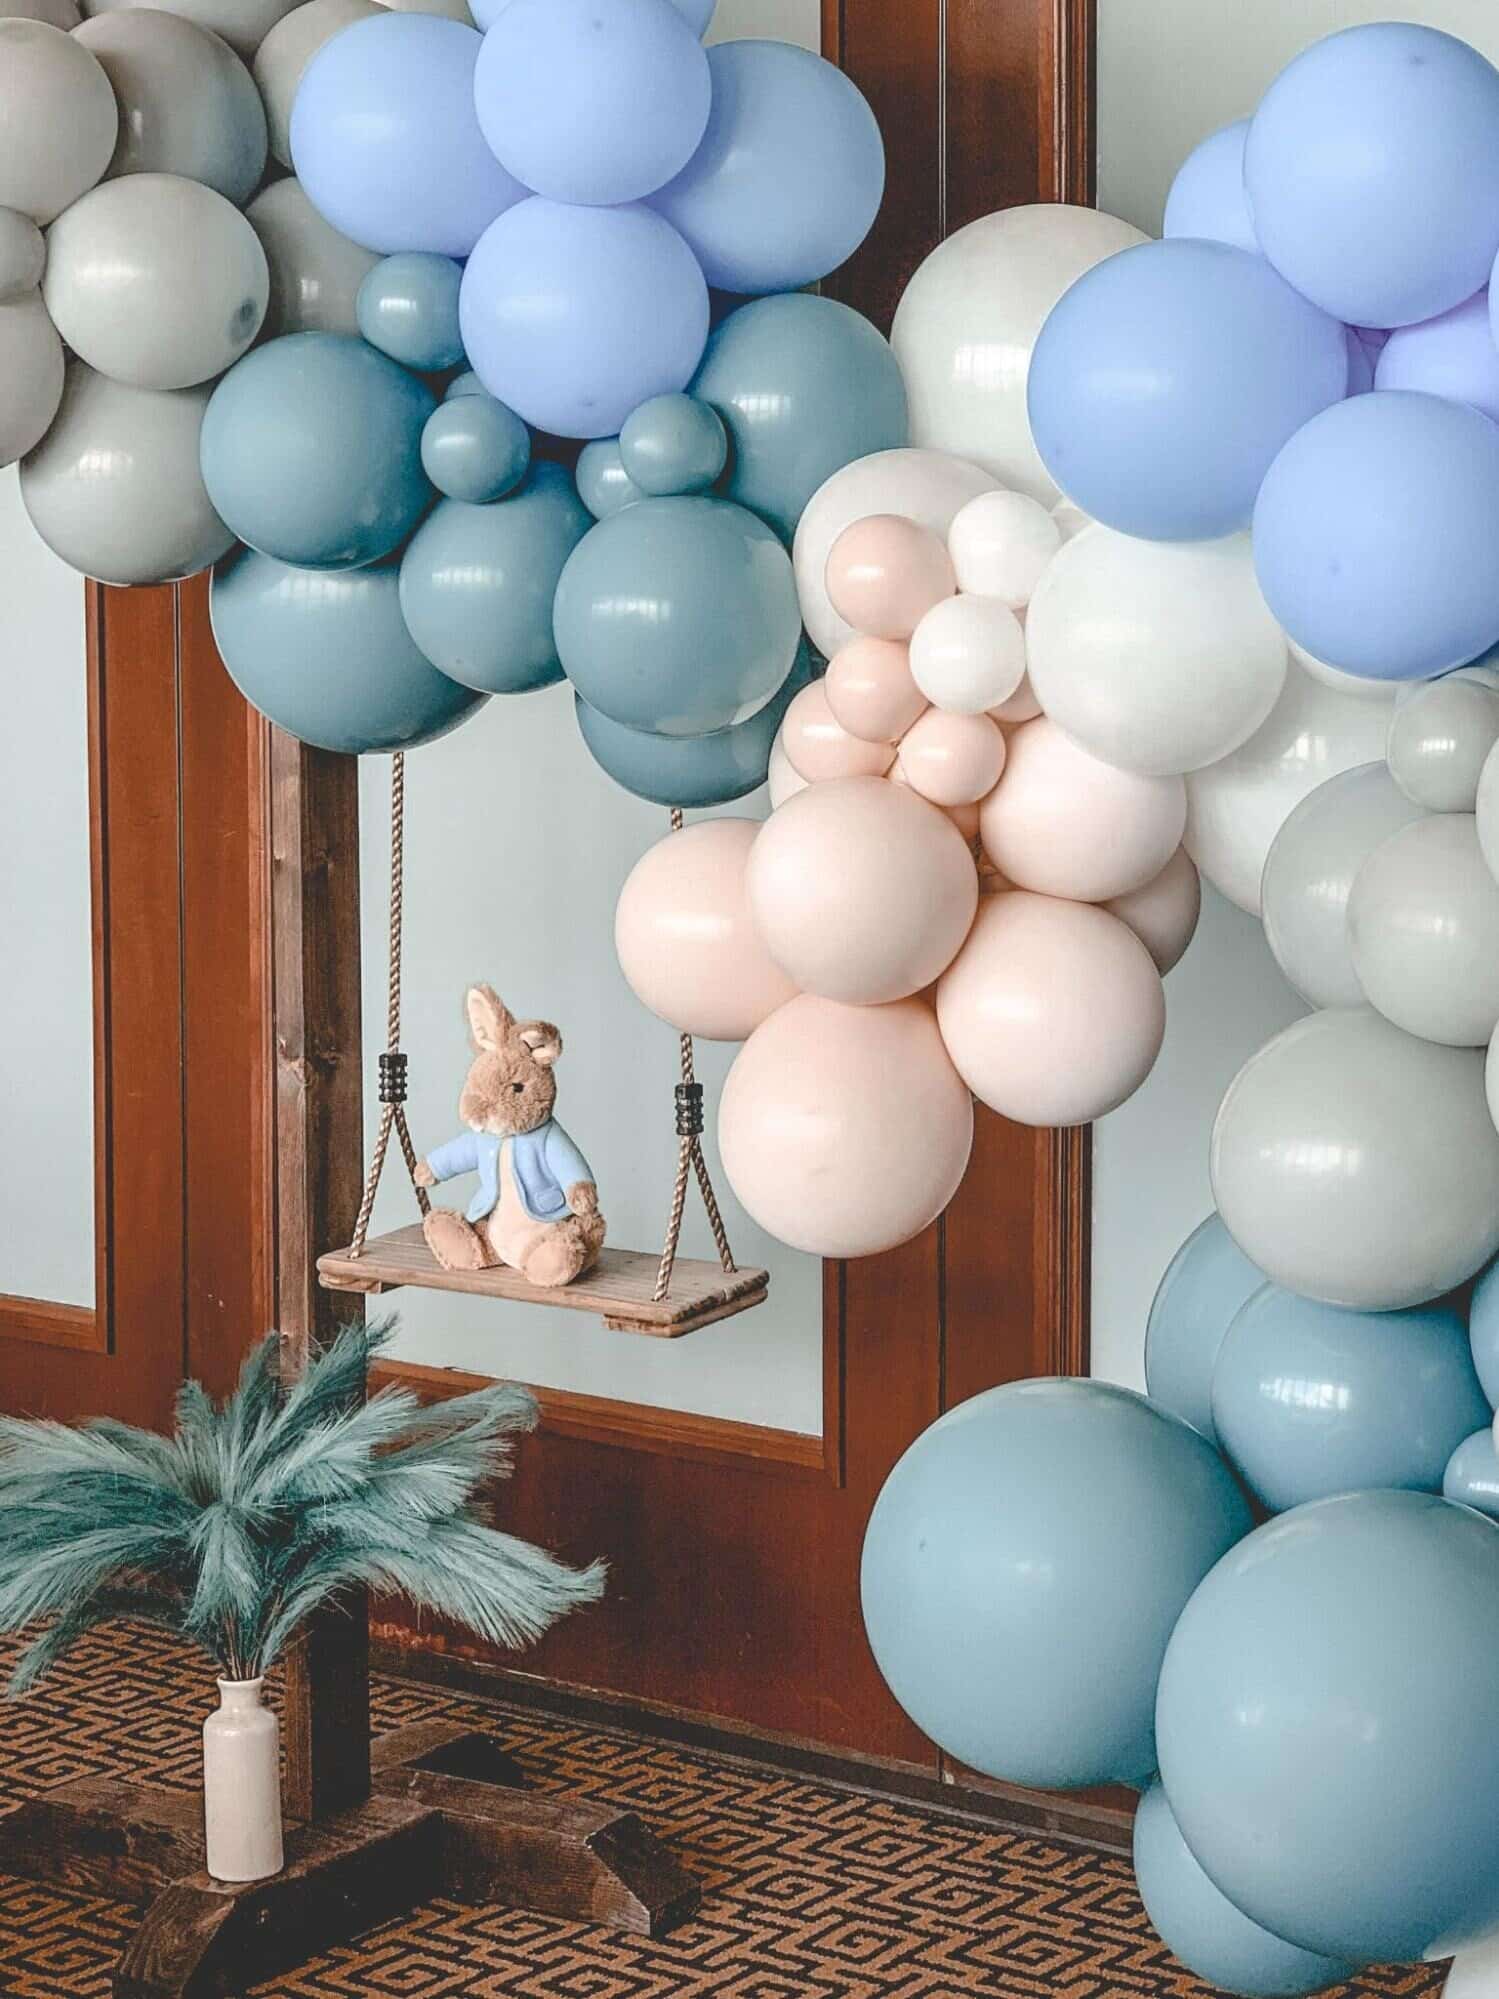 Balloon arrangement for baby shower event planned by L'élite Events